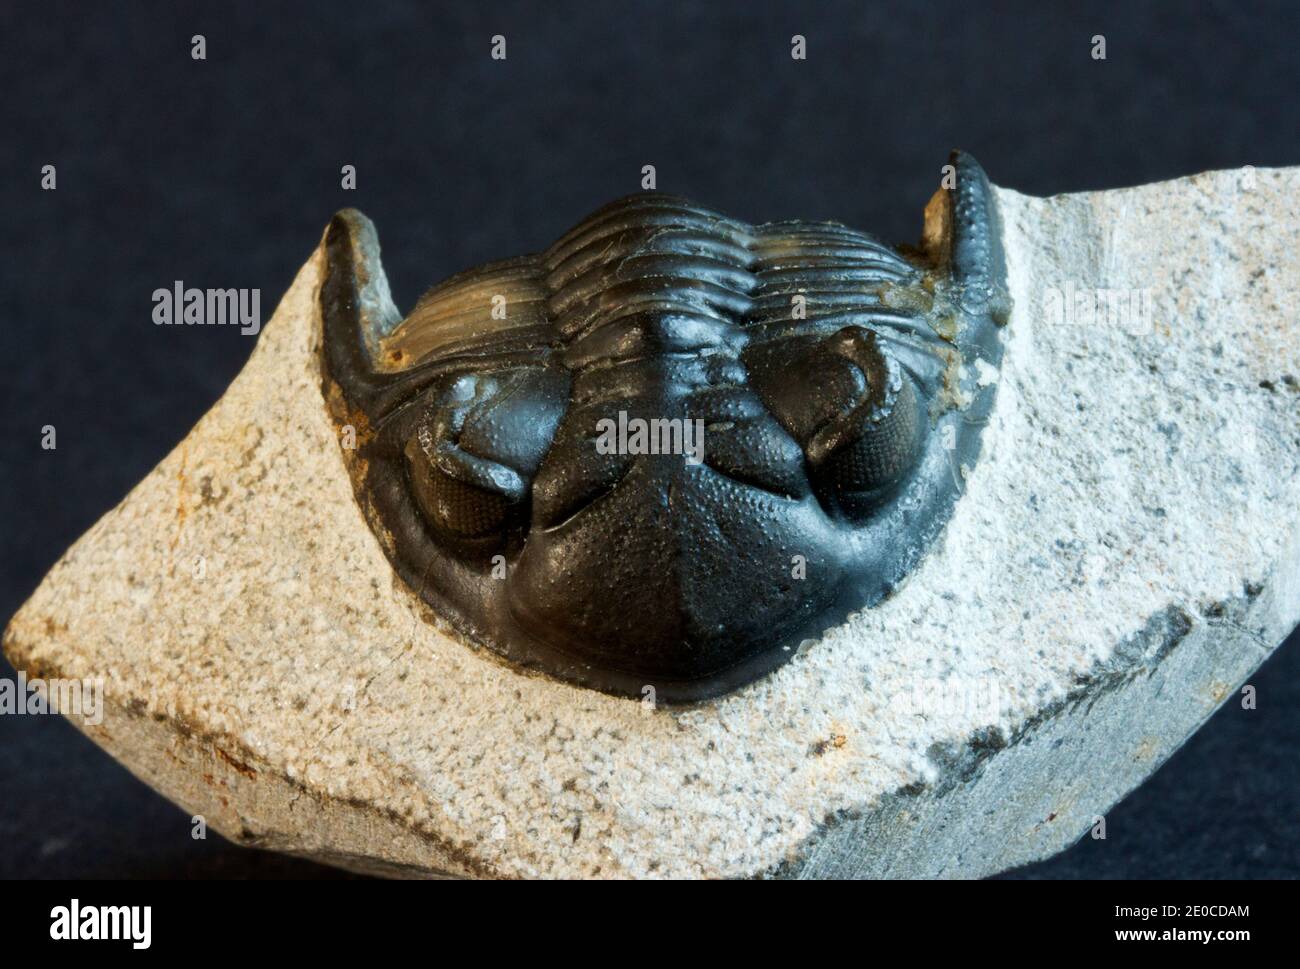 The Trilobite family was an amazingly successful early marine arthropod. The diversity of species show they adapted to many marine environments Stock Photo